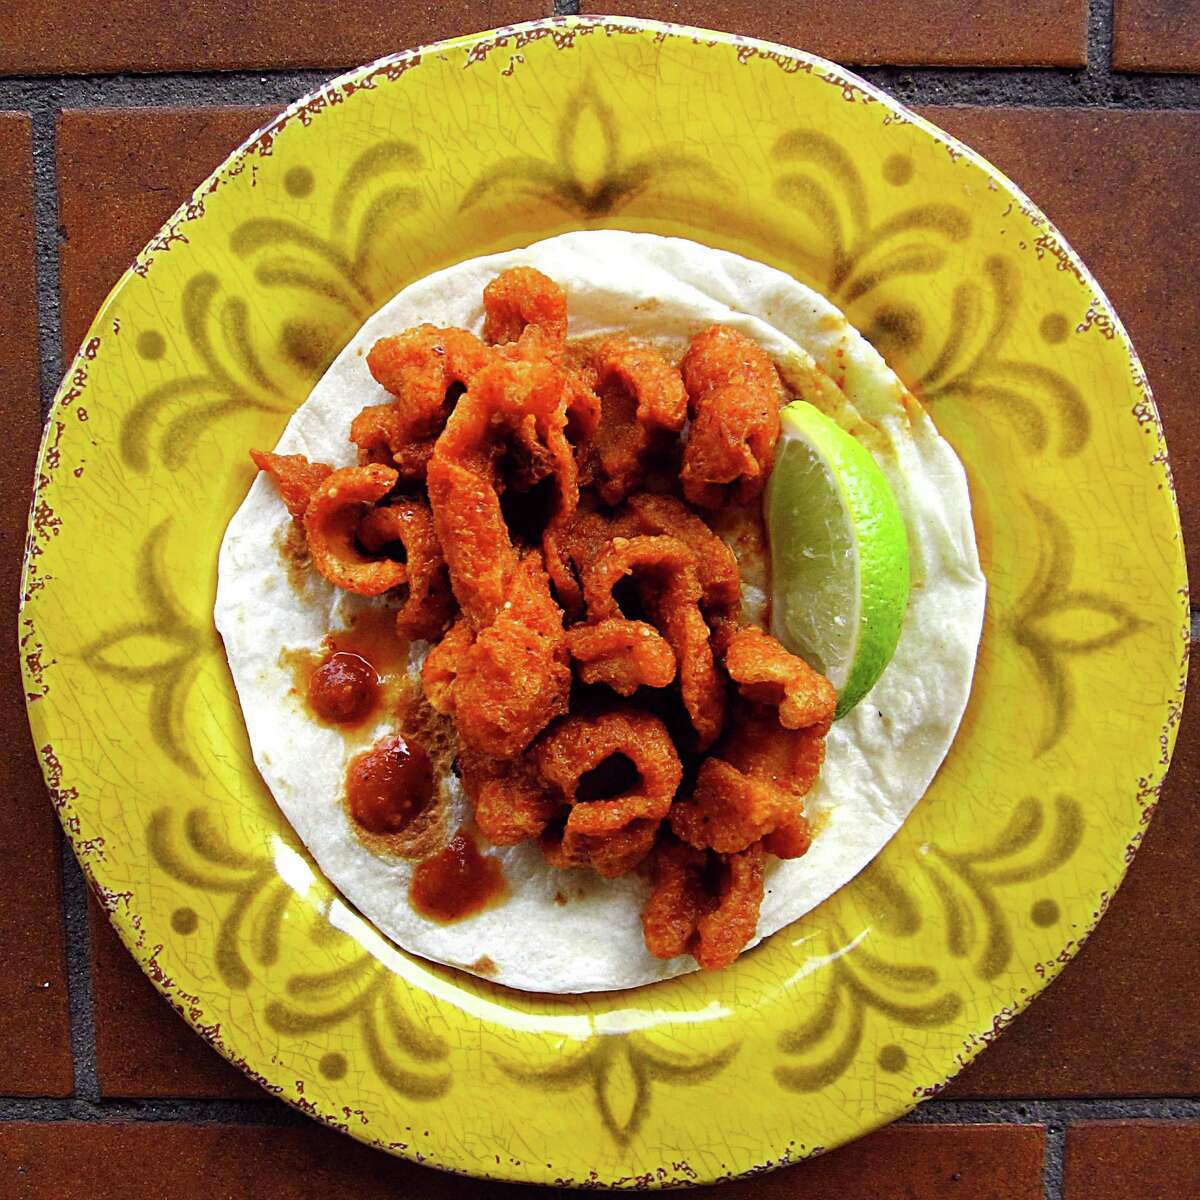 A chicharrones en salsa roja taco from El Buen Gusto Mexican Cafe on Tezel Road is our Tacof of the Week for Week 3 of 365 Days of Tacos.